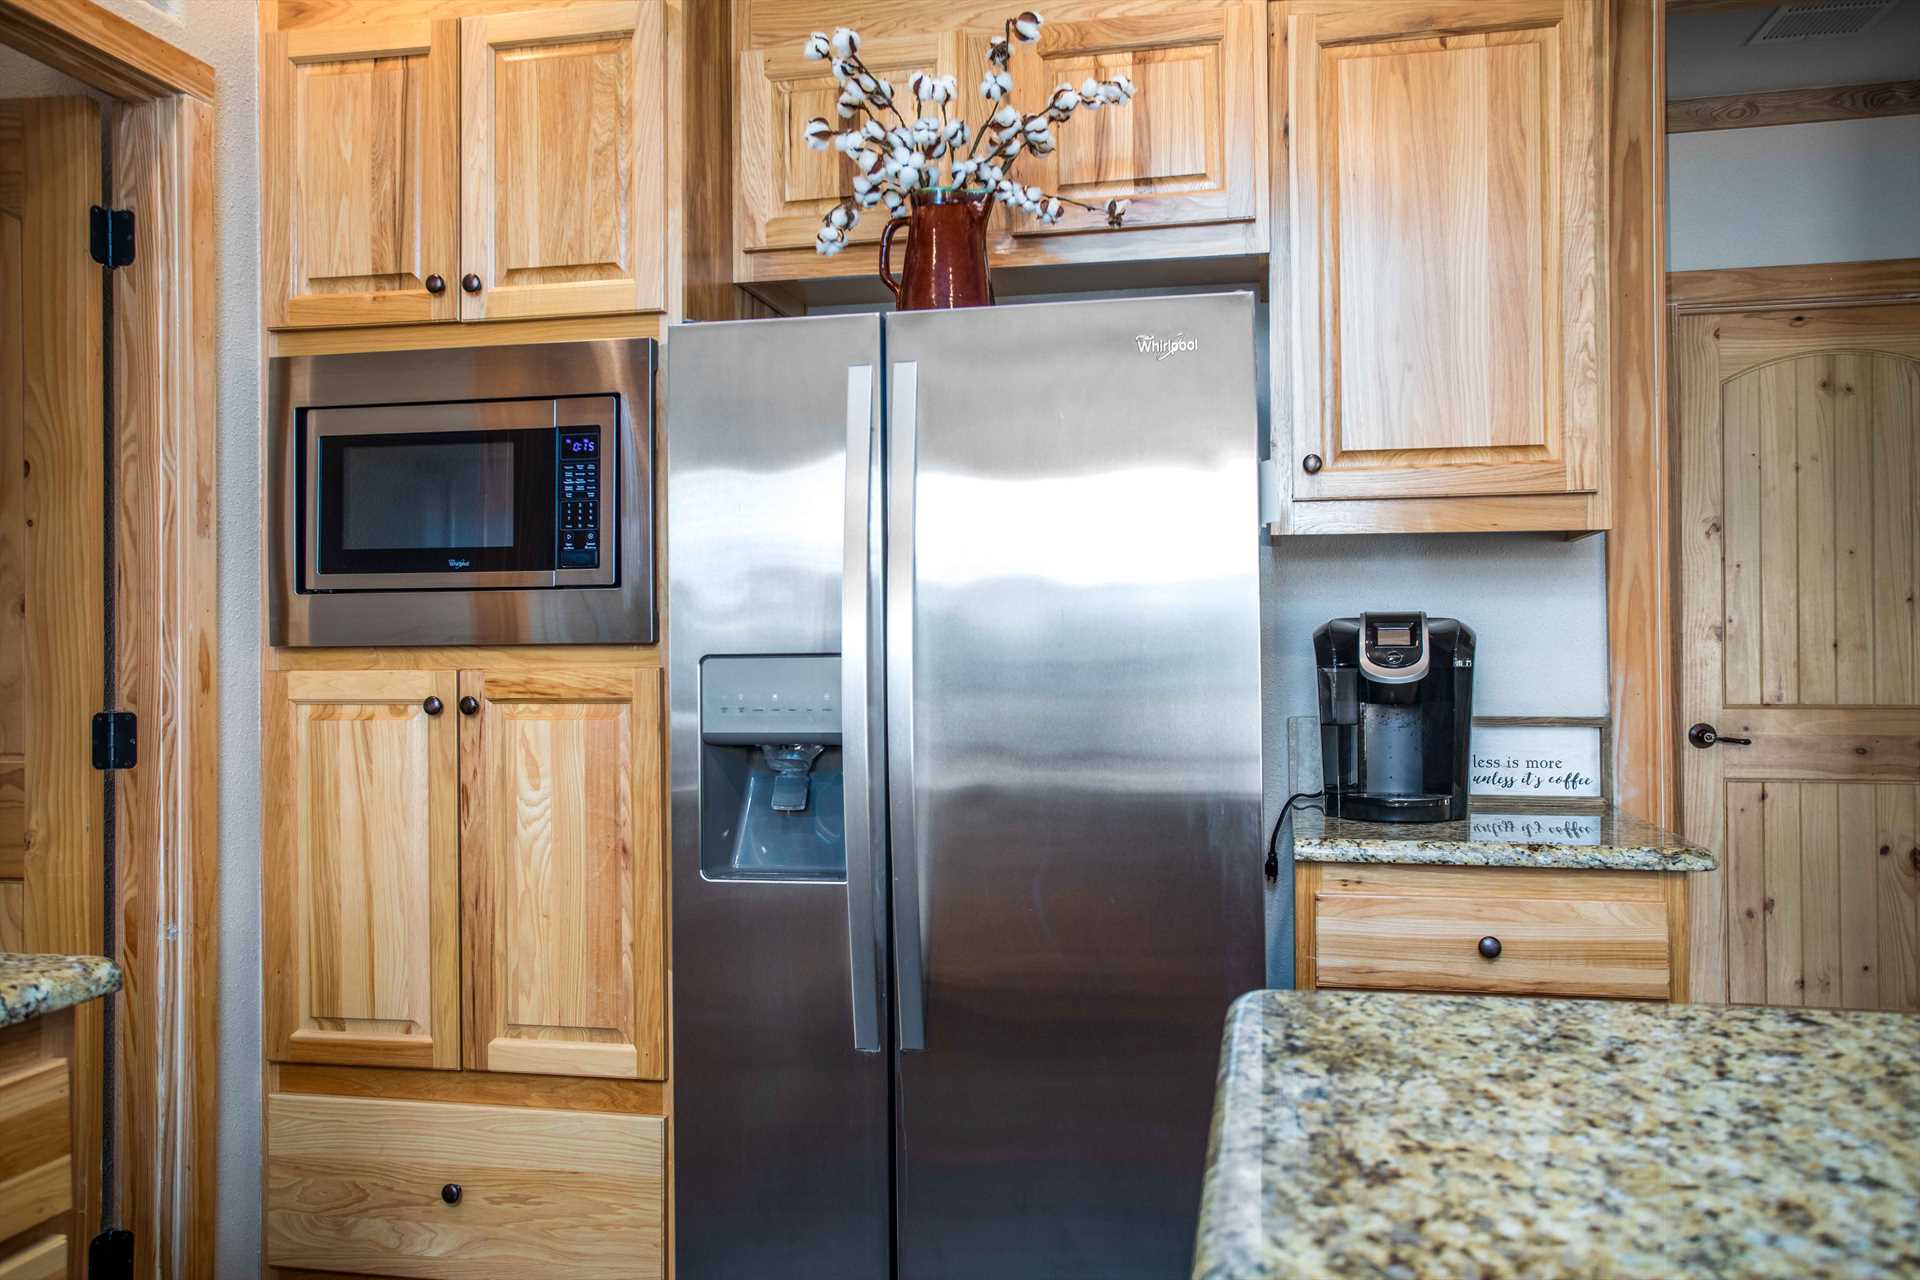                                                 Modern appliances-including two coffee makers and a dishwasher-make the Hideaway's kitchen efficient and easy to use!